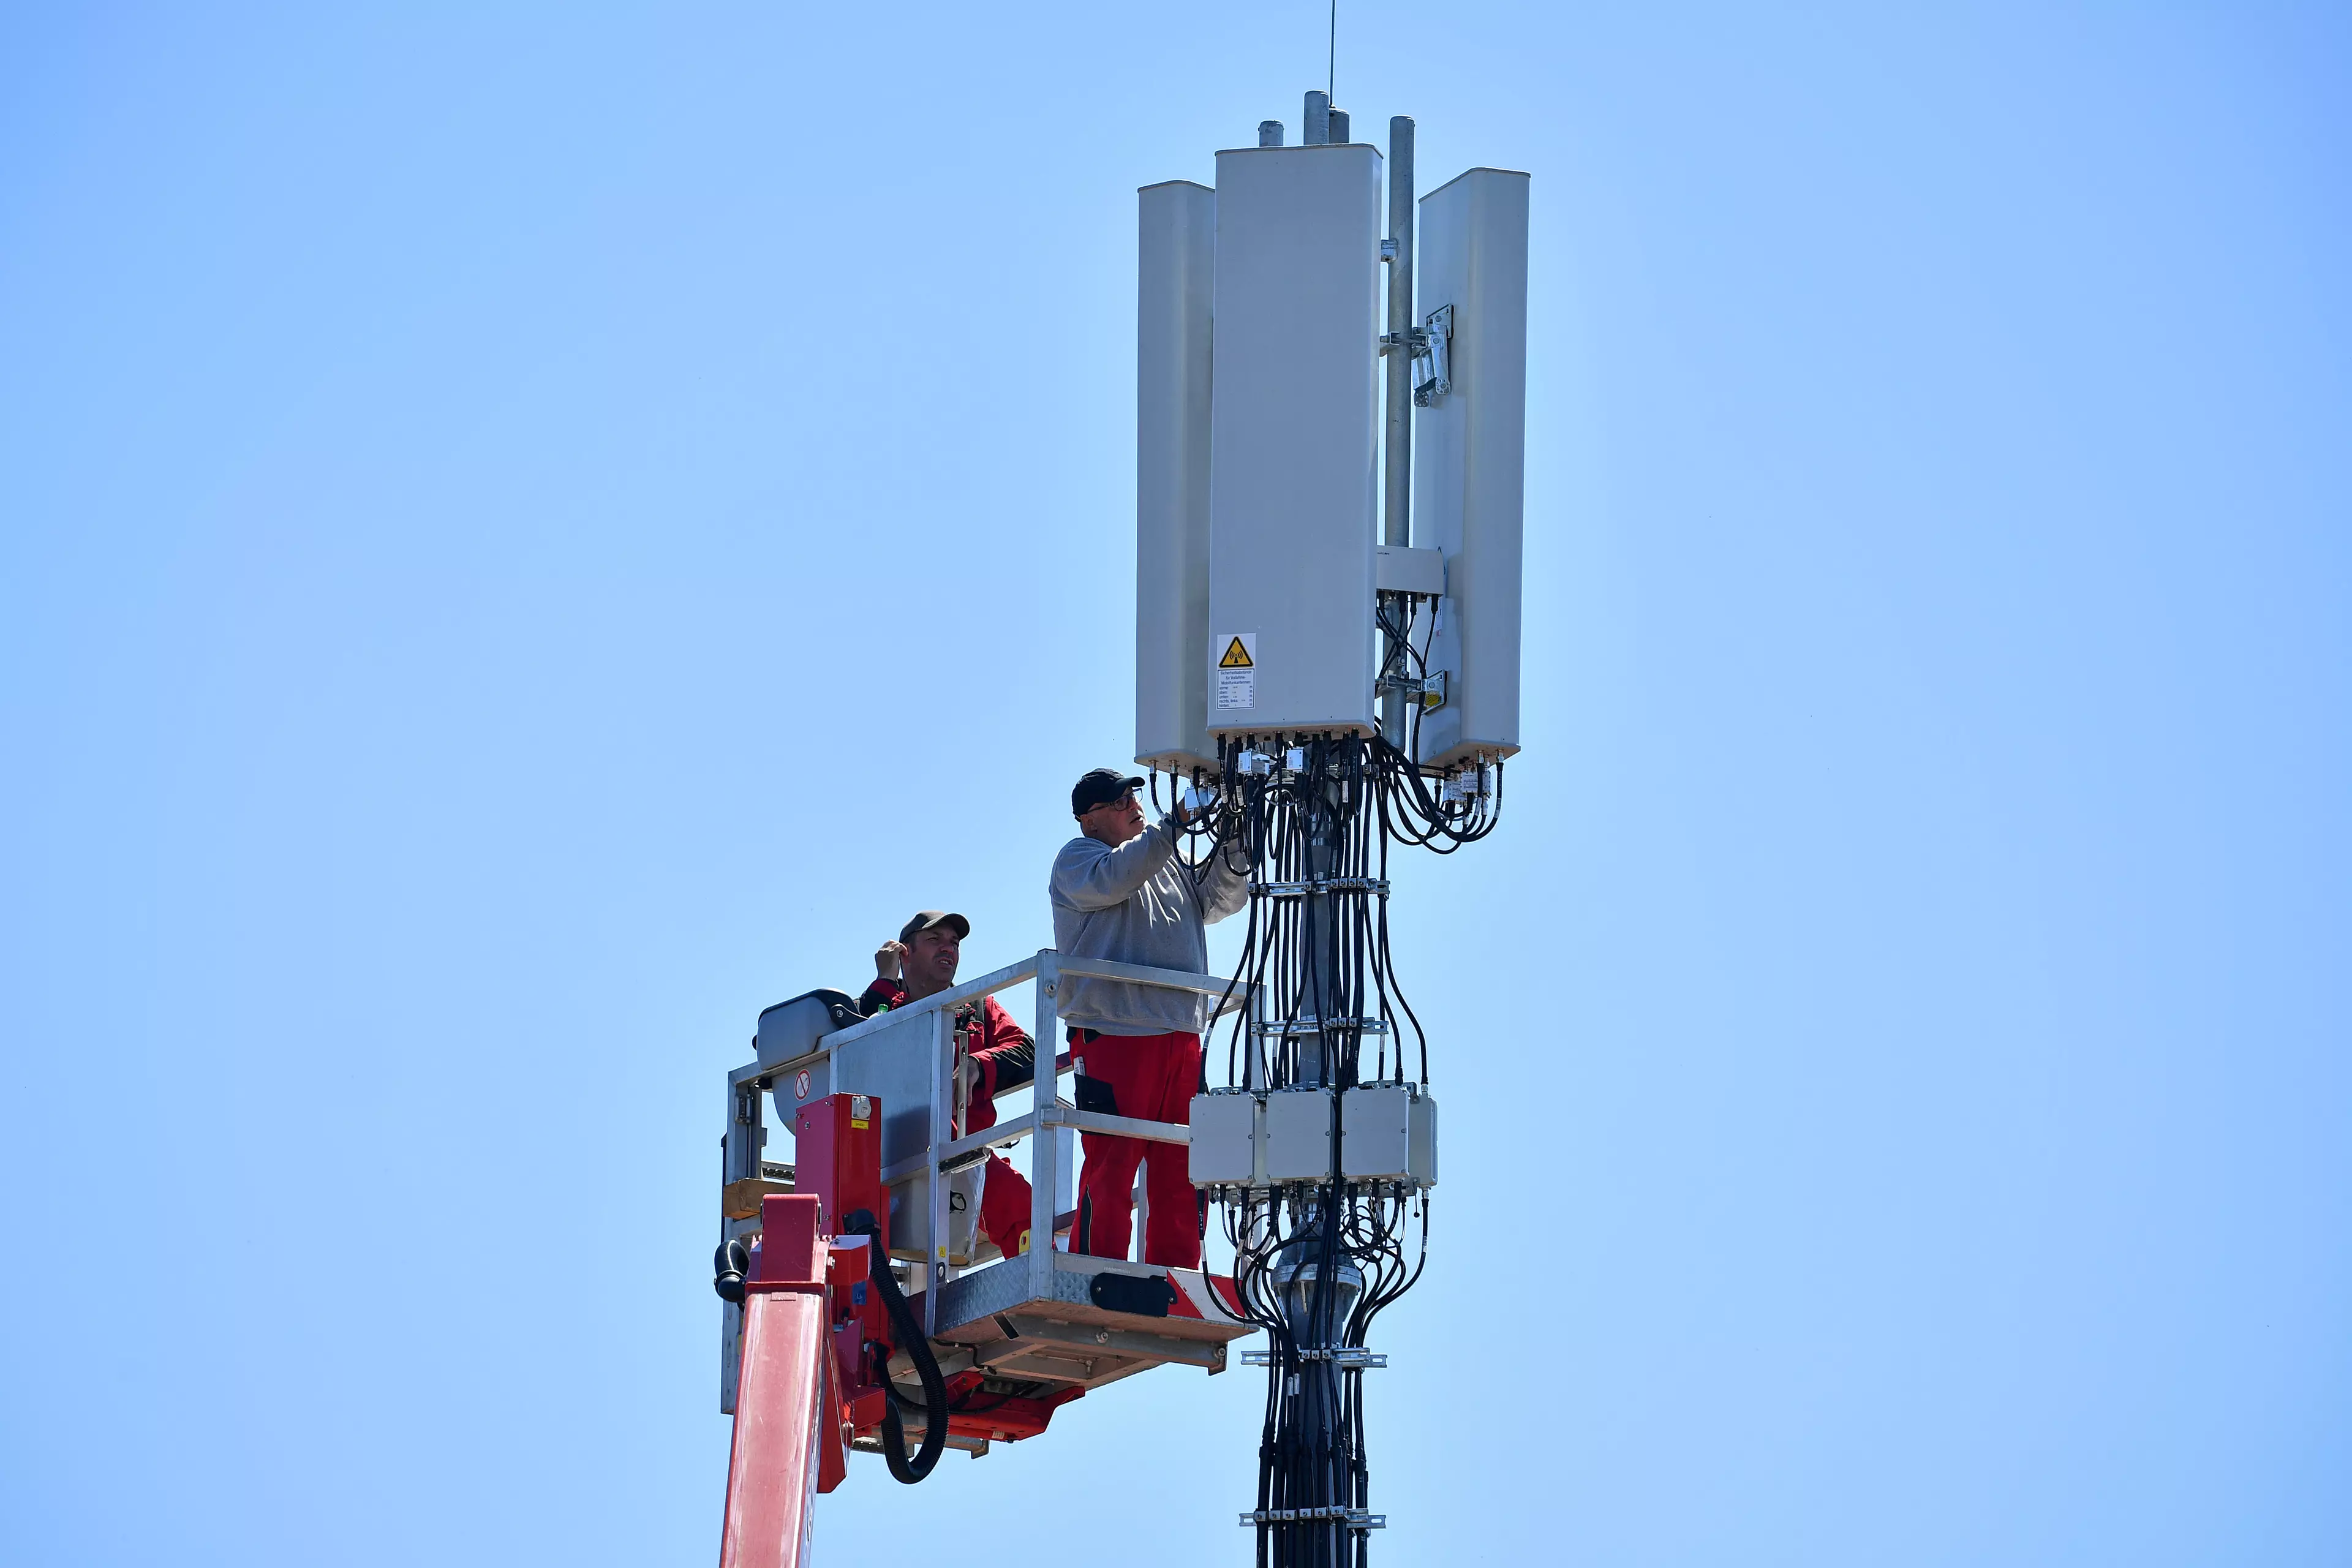 5G tower.